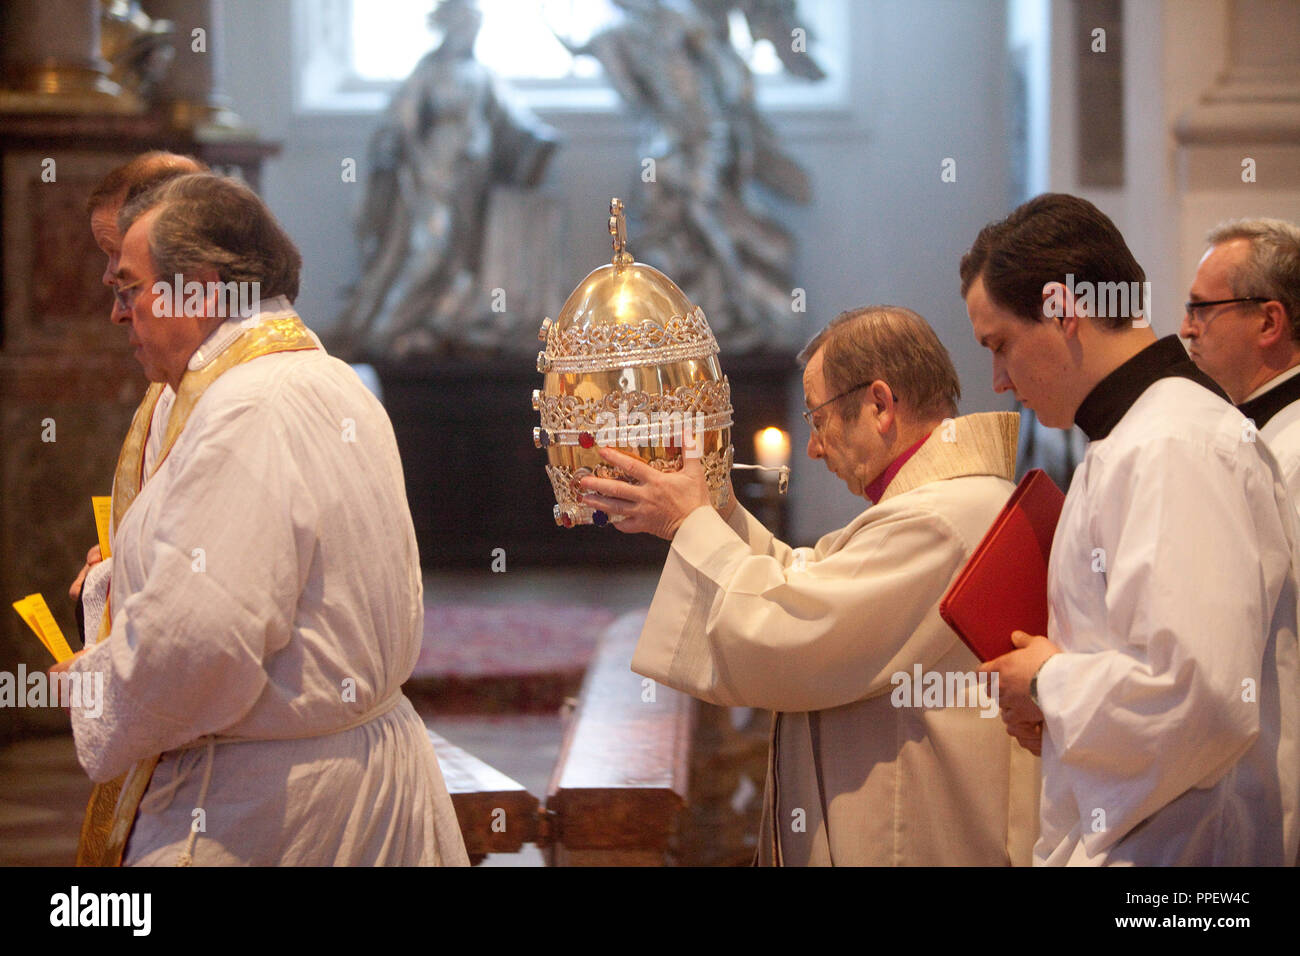 Pope Tiara High Resolution Stock Photography and Images - Alamy